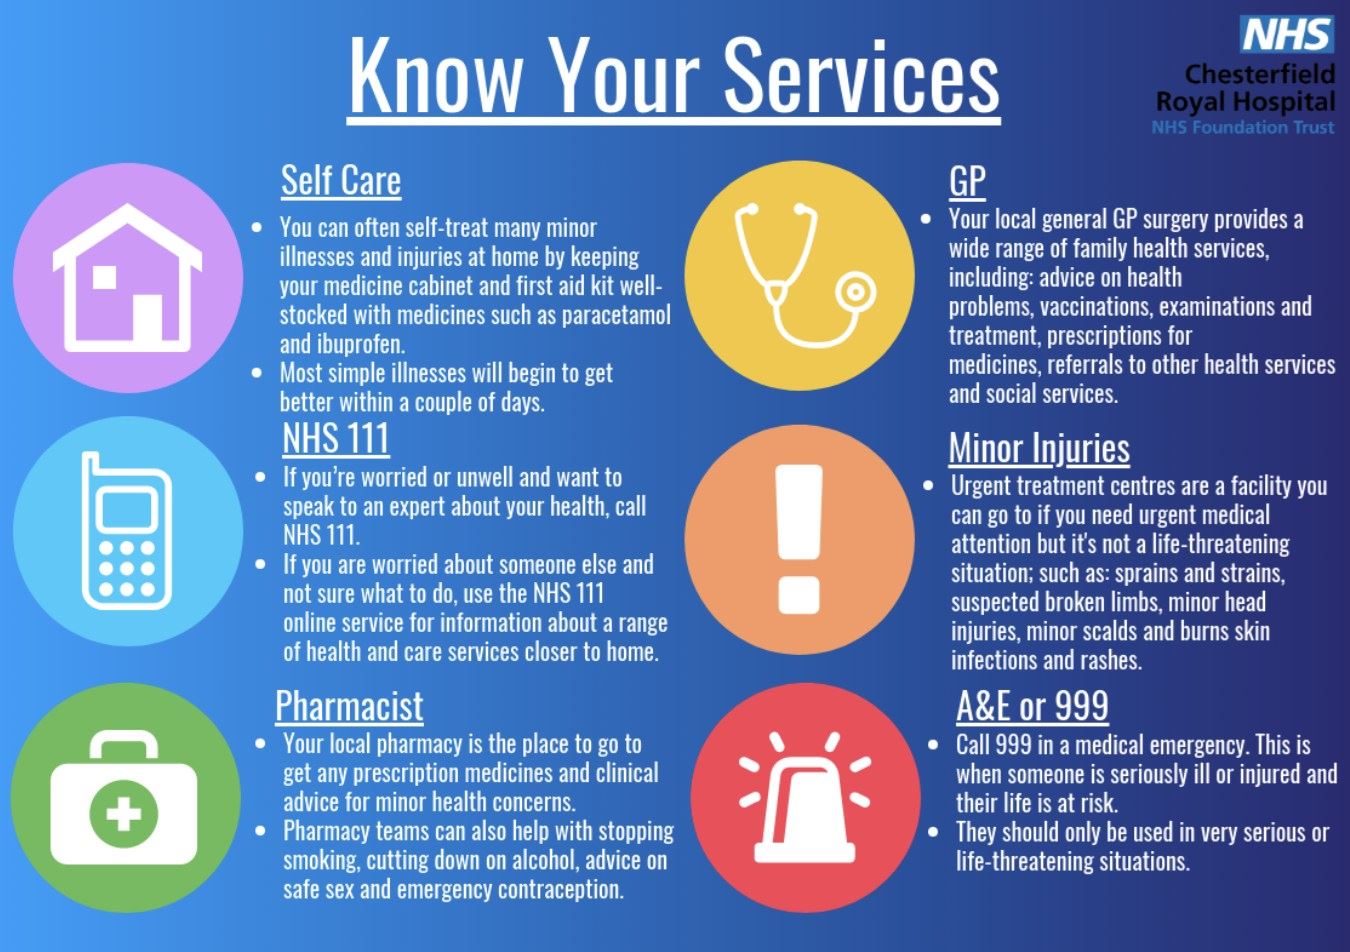 Know your Services